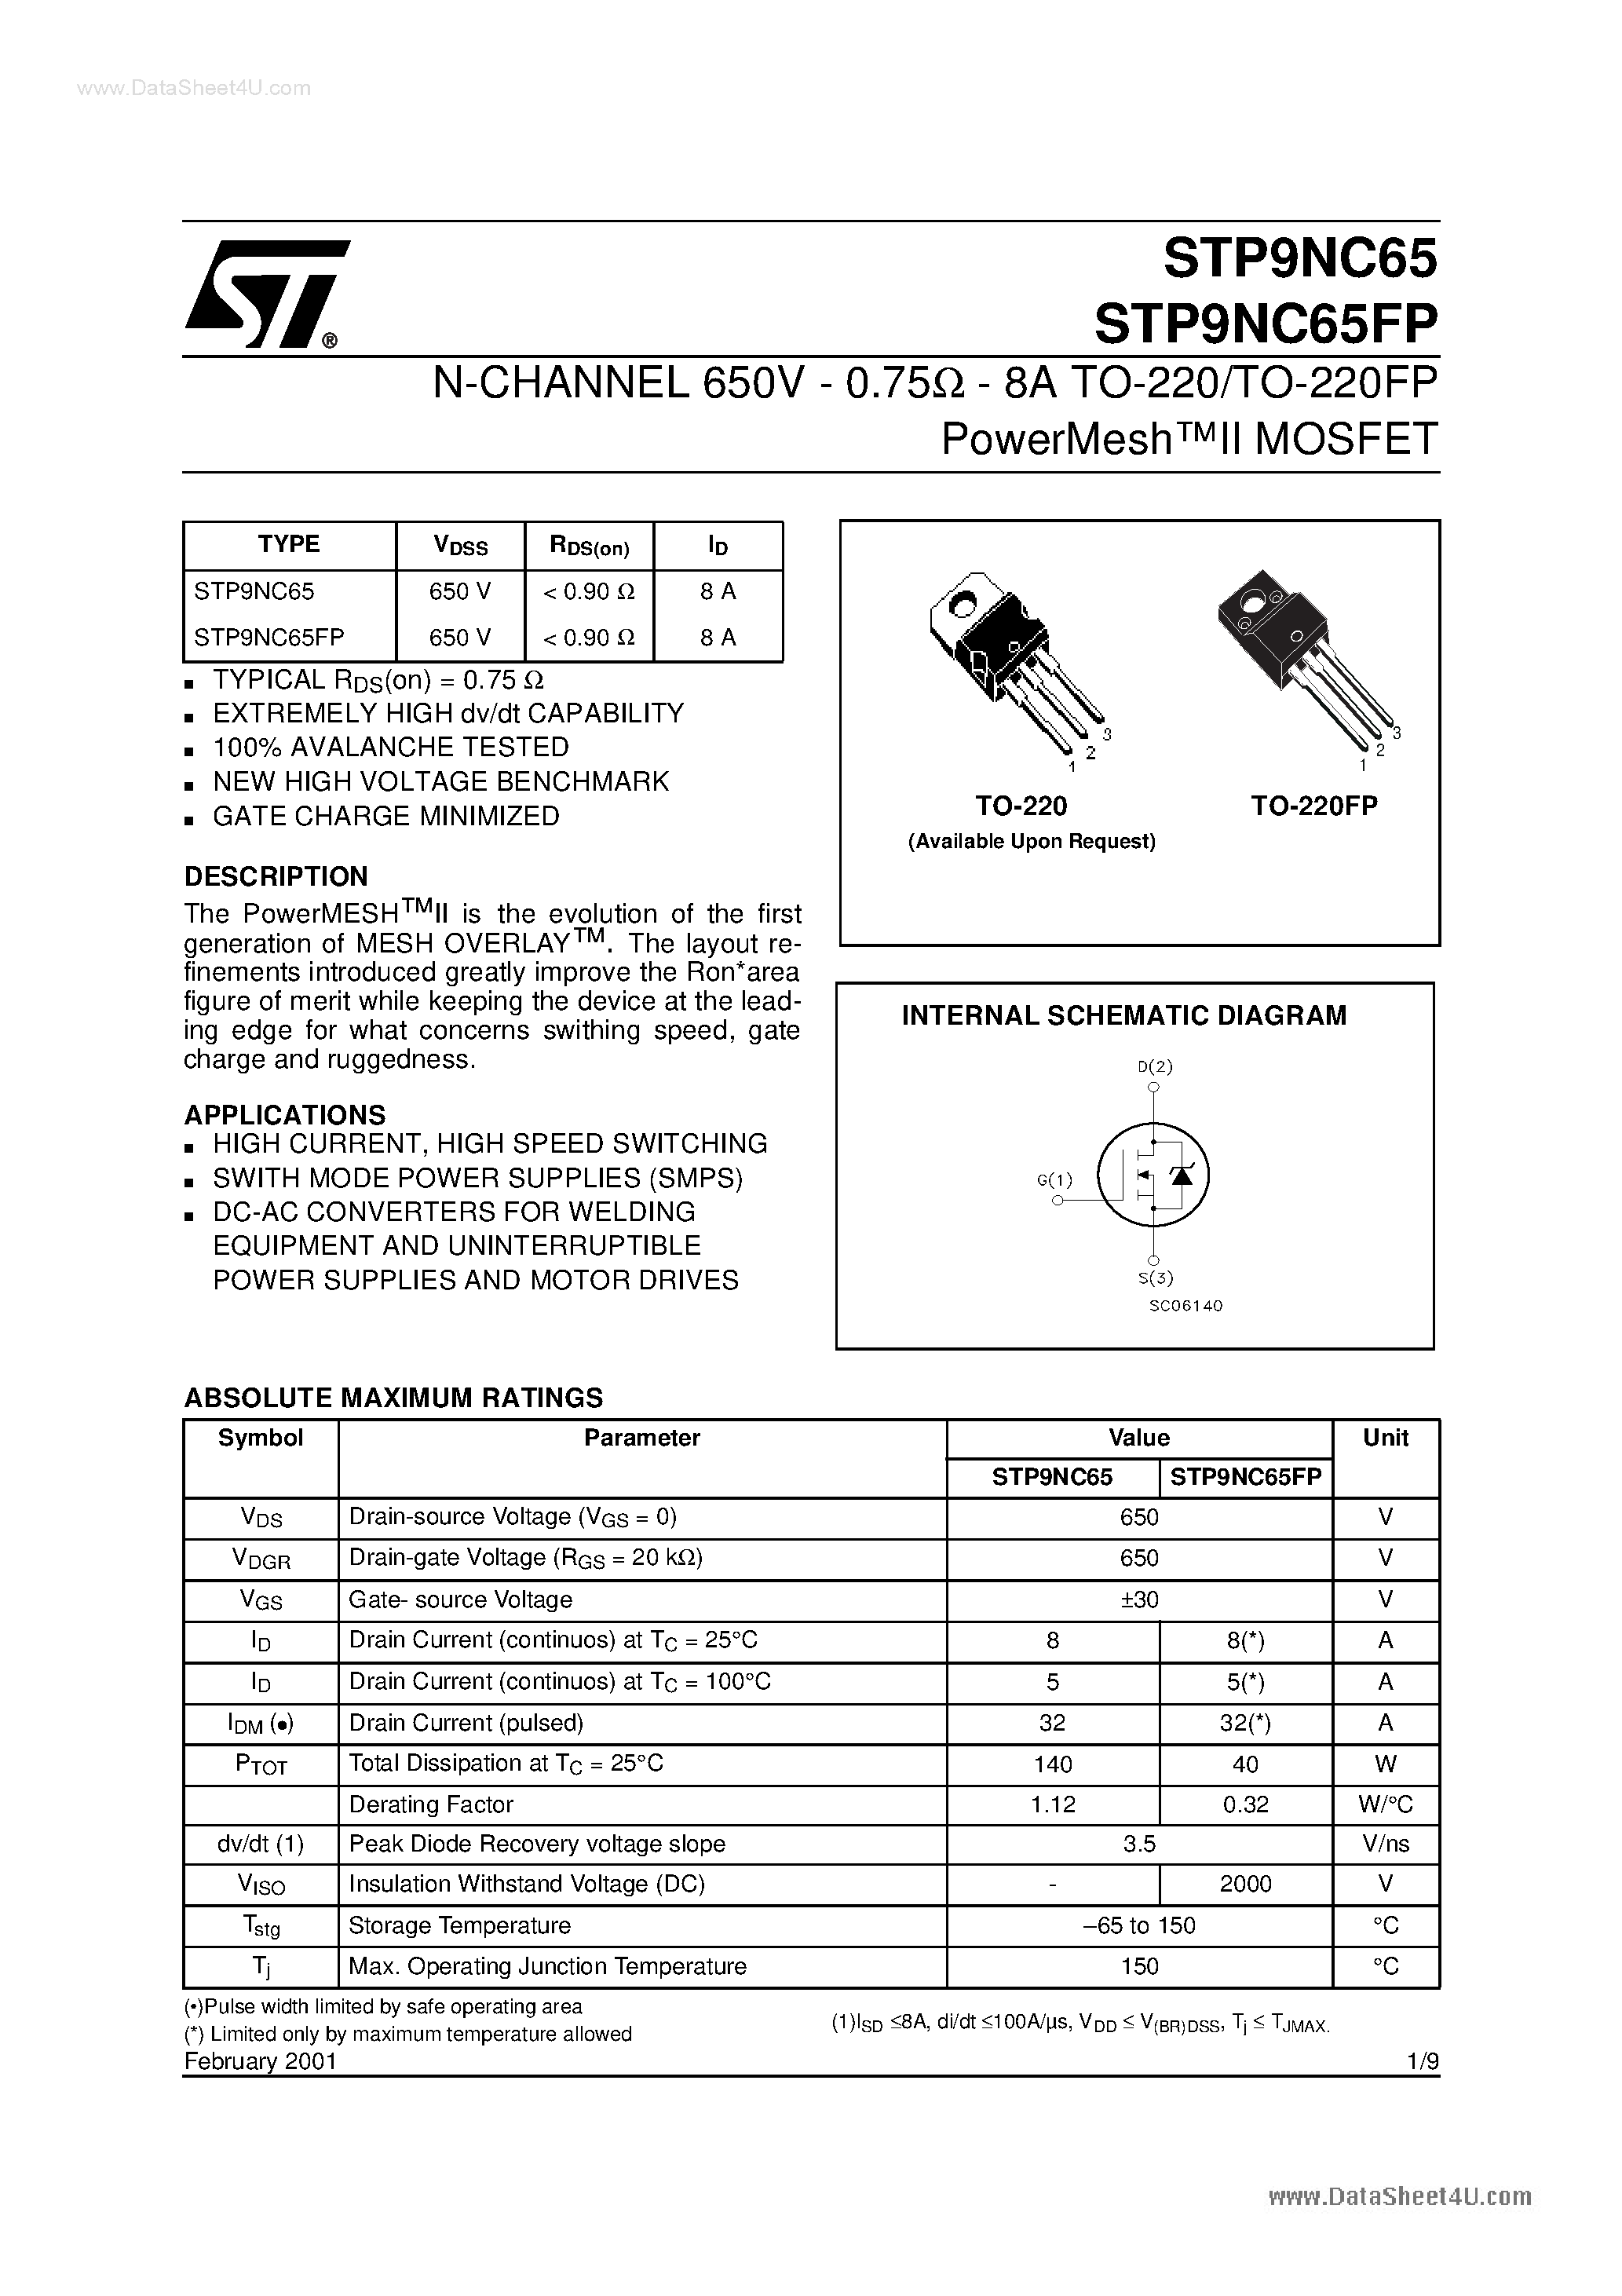 Datasheet P9NC65FP - Search -----> STP9NC65FP page 1